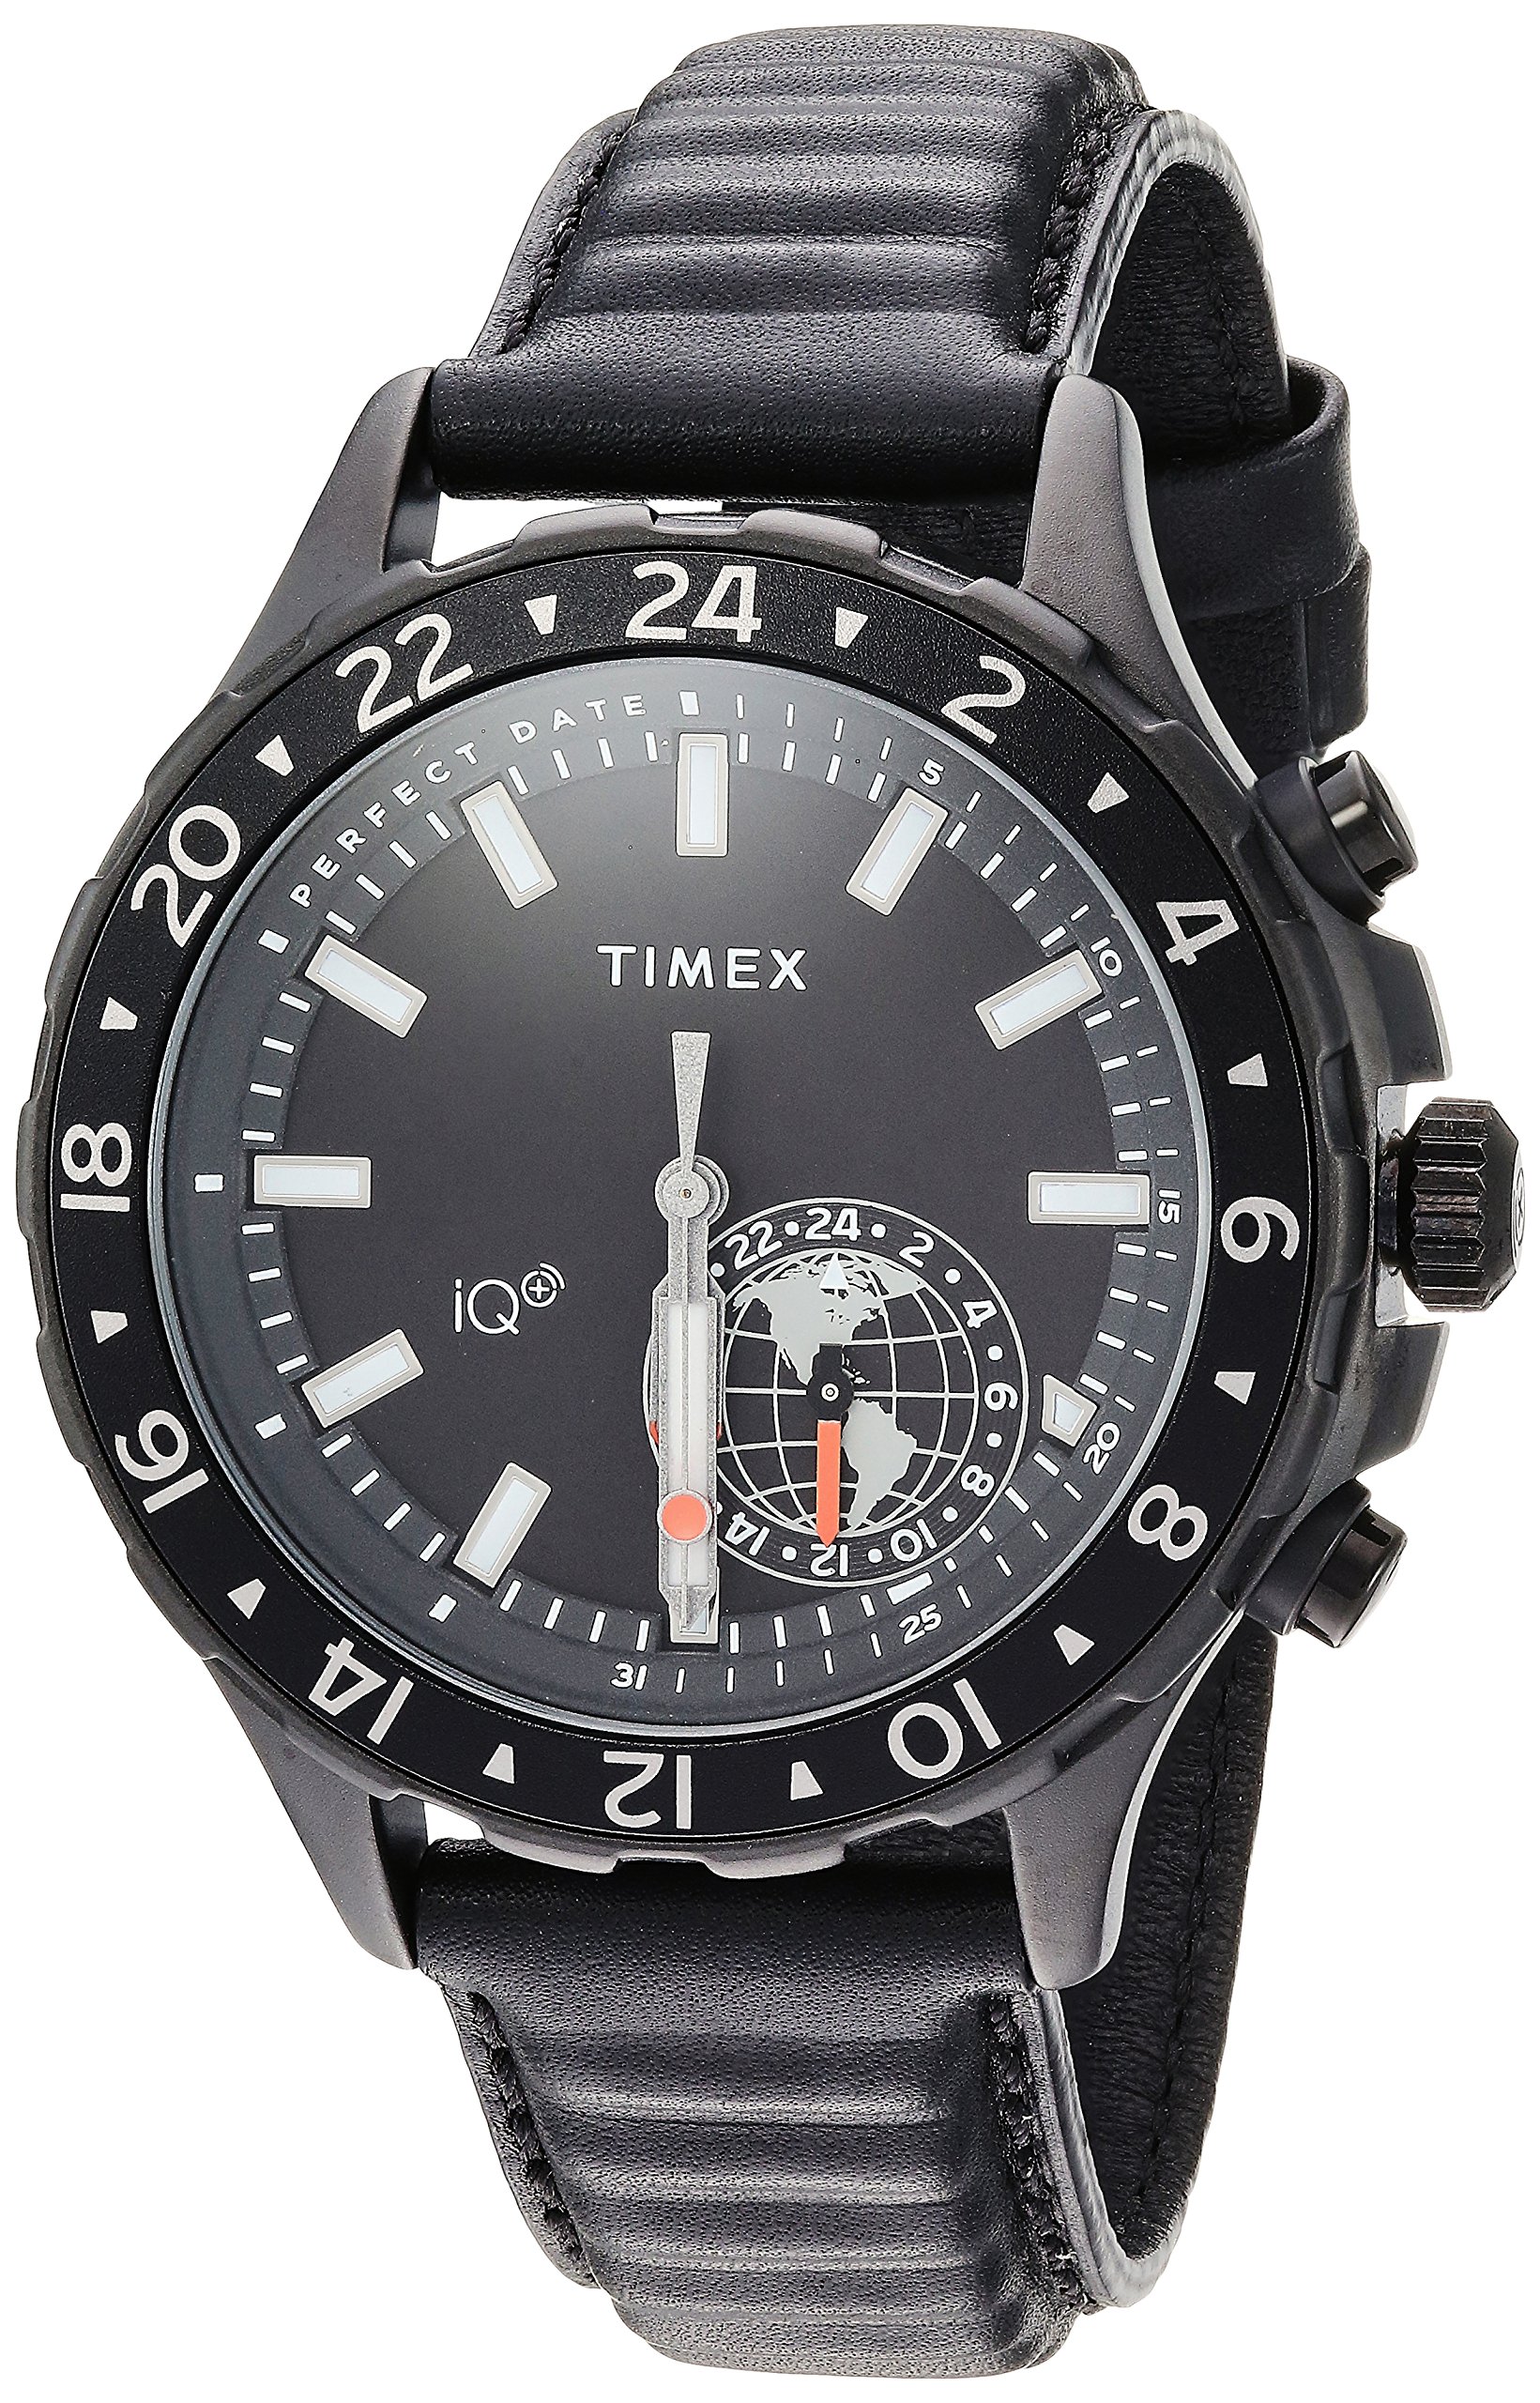 Timex Mens IQ+ Move Multi-Time Black Leather Strap Watch TW2R39900